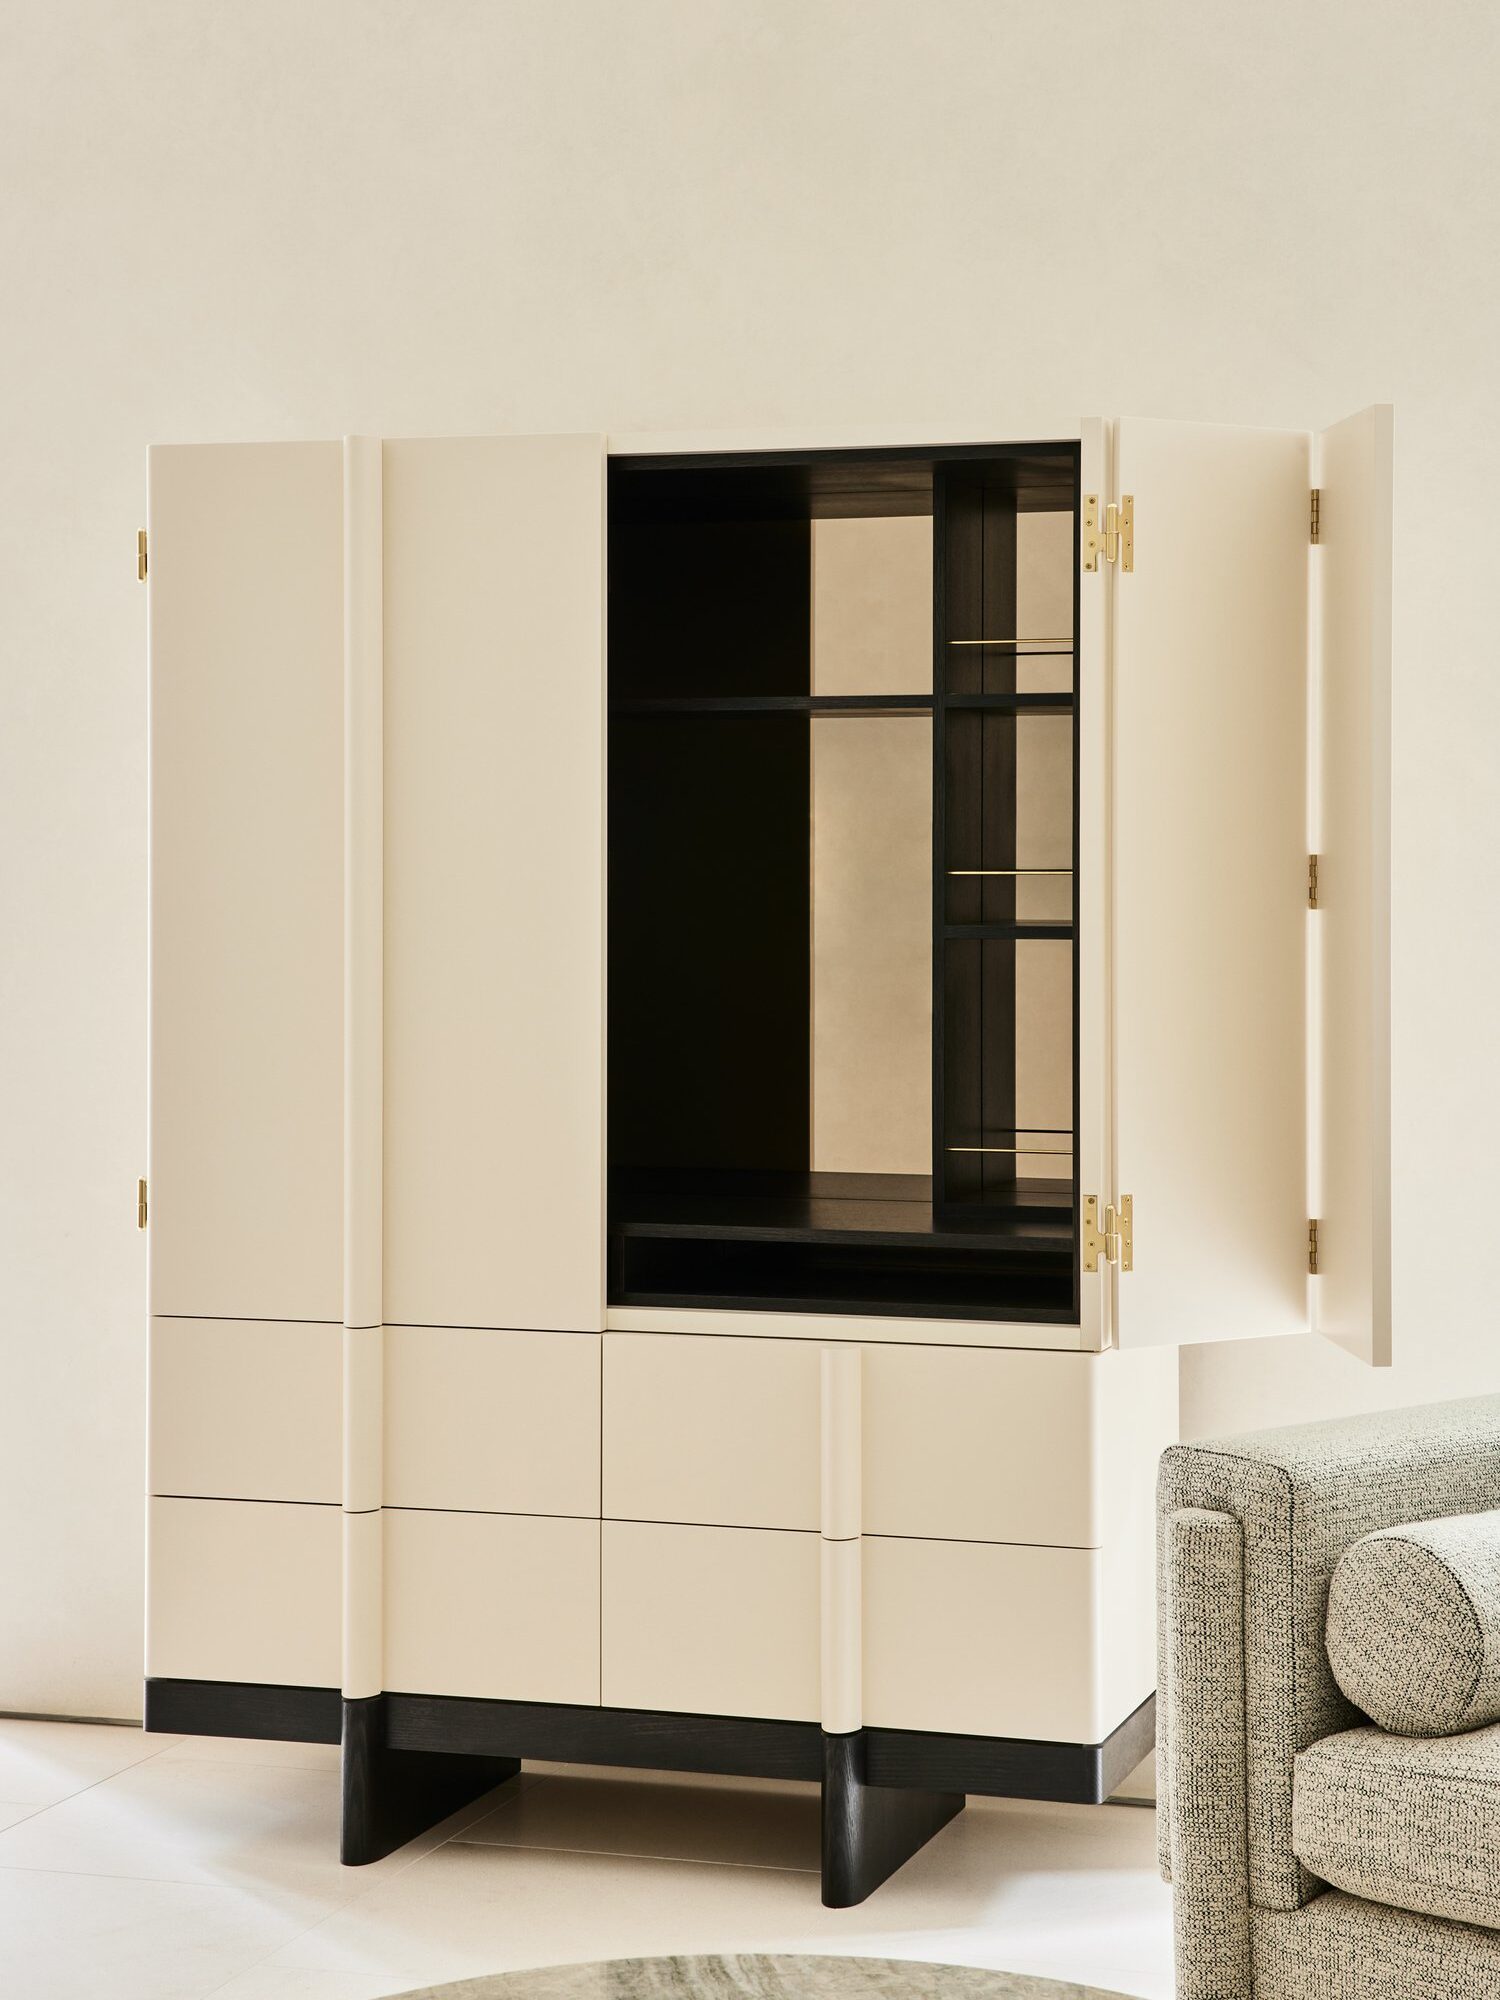 A beige modern cabinet with gold hinges and open doors revealing black interior shelves. It stands next to a grey upholstered sofa in a neutral-toned room.